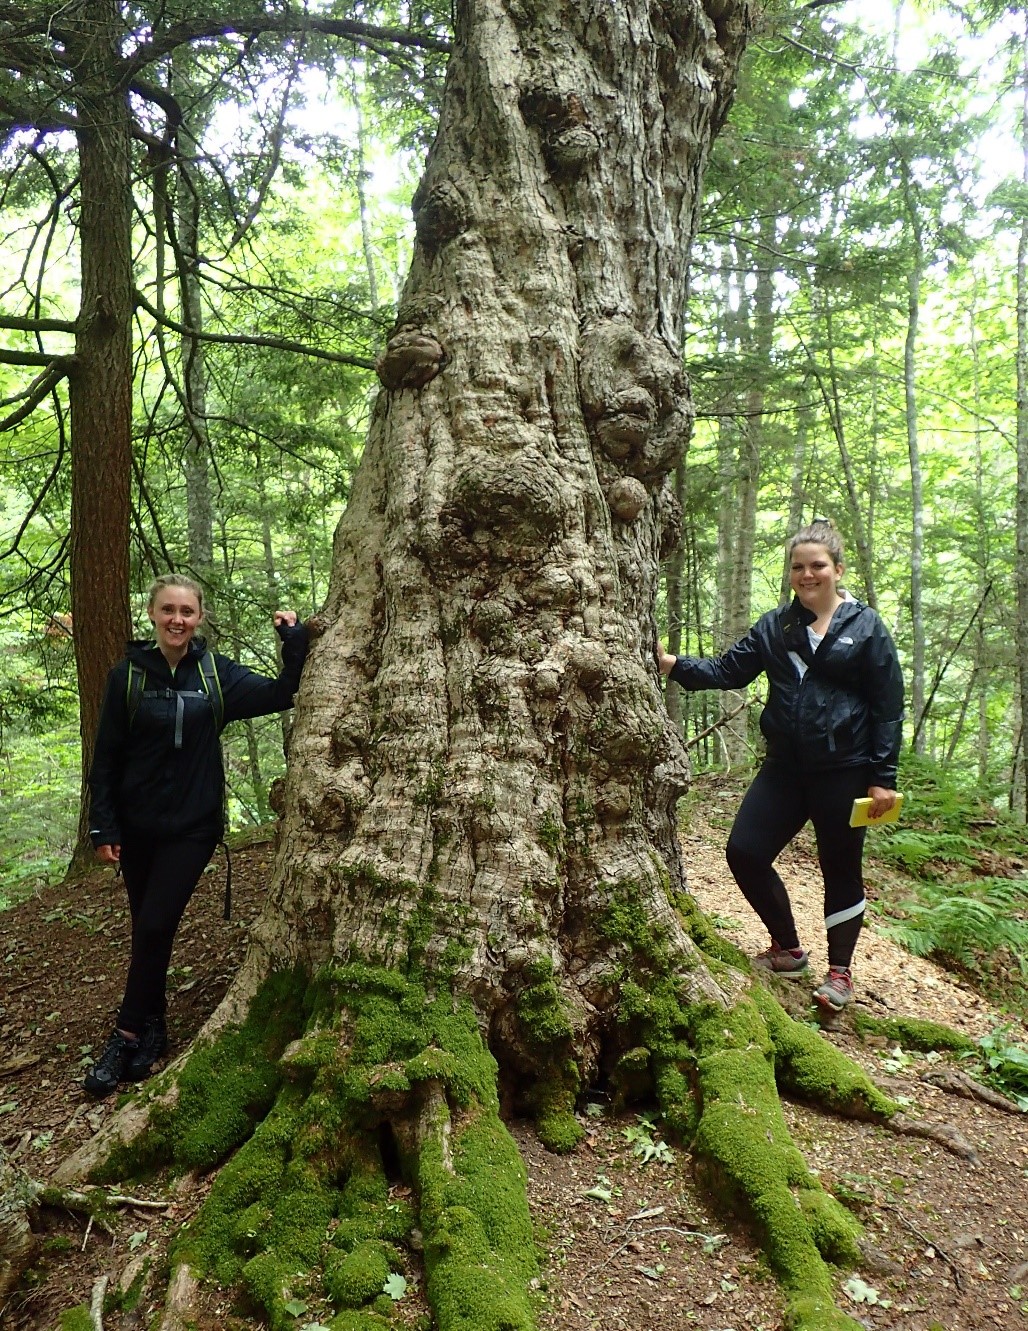 River Institute Geocache Project Team (left to right) Lacey MacDonald (team member) and Cristina Charette (Team Lead) on a recent visit to Chignecto National Wildlife Area, located at the head of the Bay of Fundy near Amherst, Nova Scotia. Credit: River Institute 